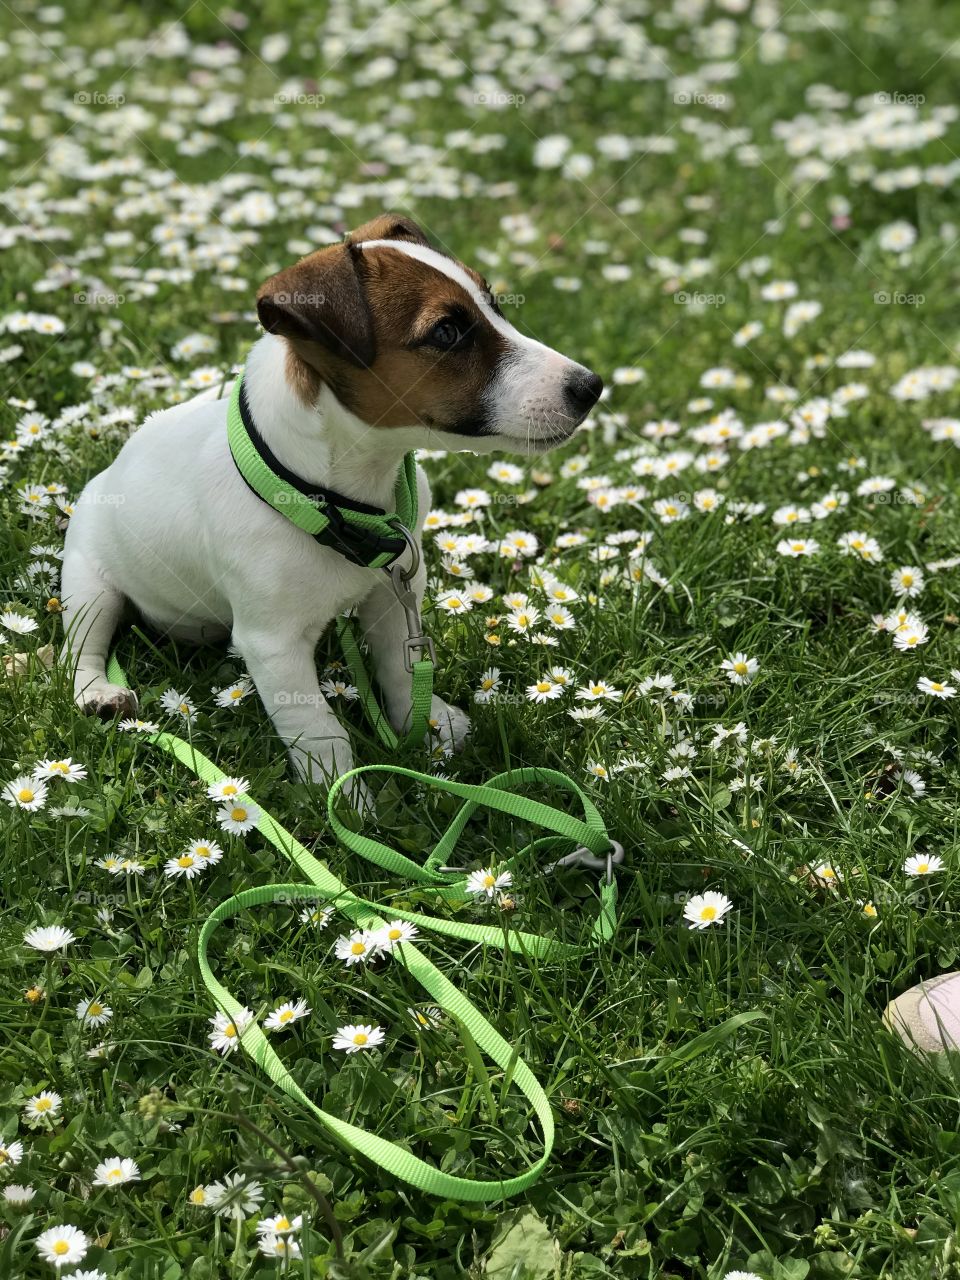 Jack Russell Terrier puppy on a green lawn with daisy flowers 